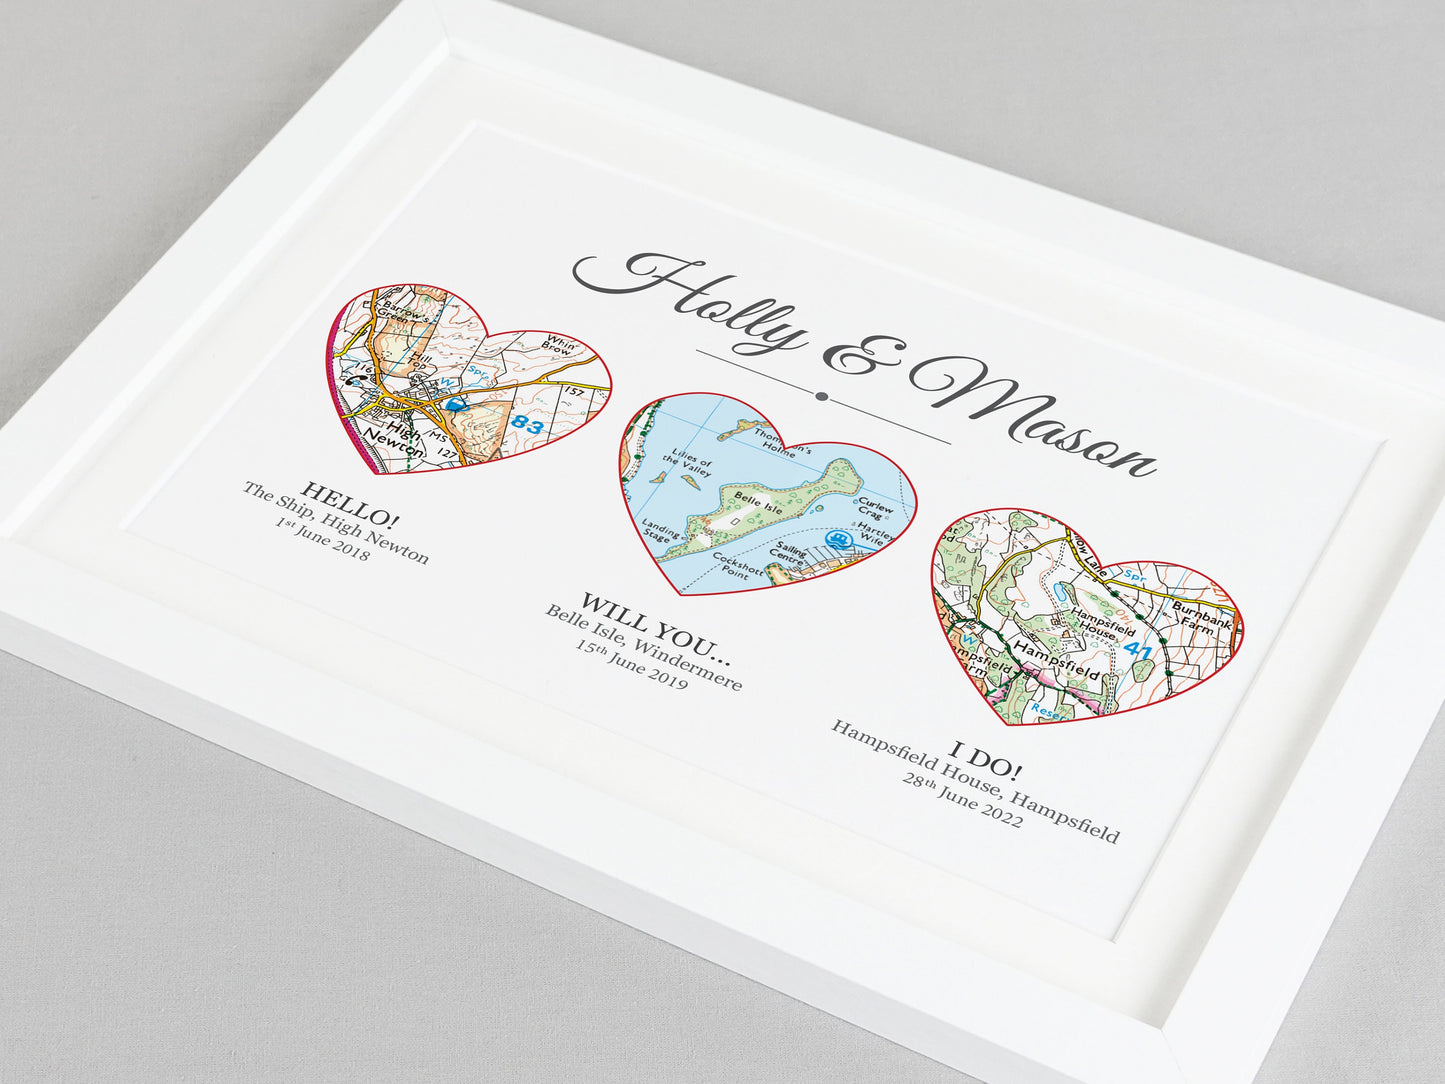 Met Engaged Married Wedding Gift | Wedding Anniversary Present | Couples Print Gift | Paper Anniversary | Gift for Wife Husband VA069